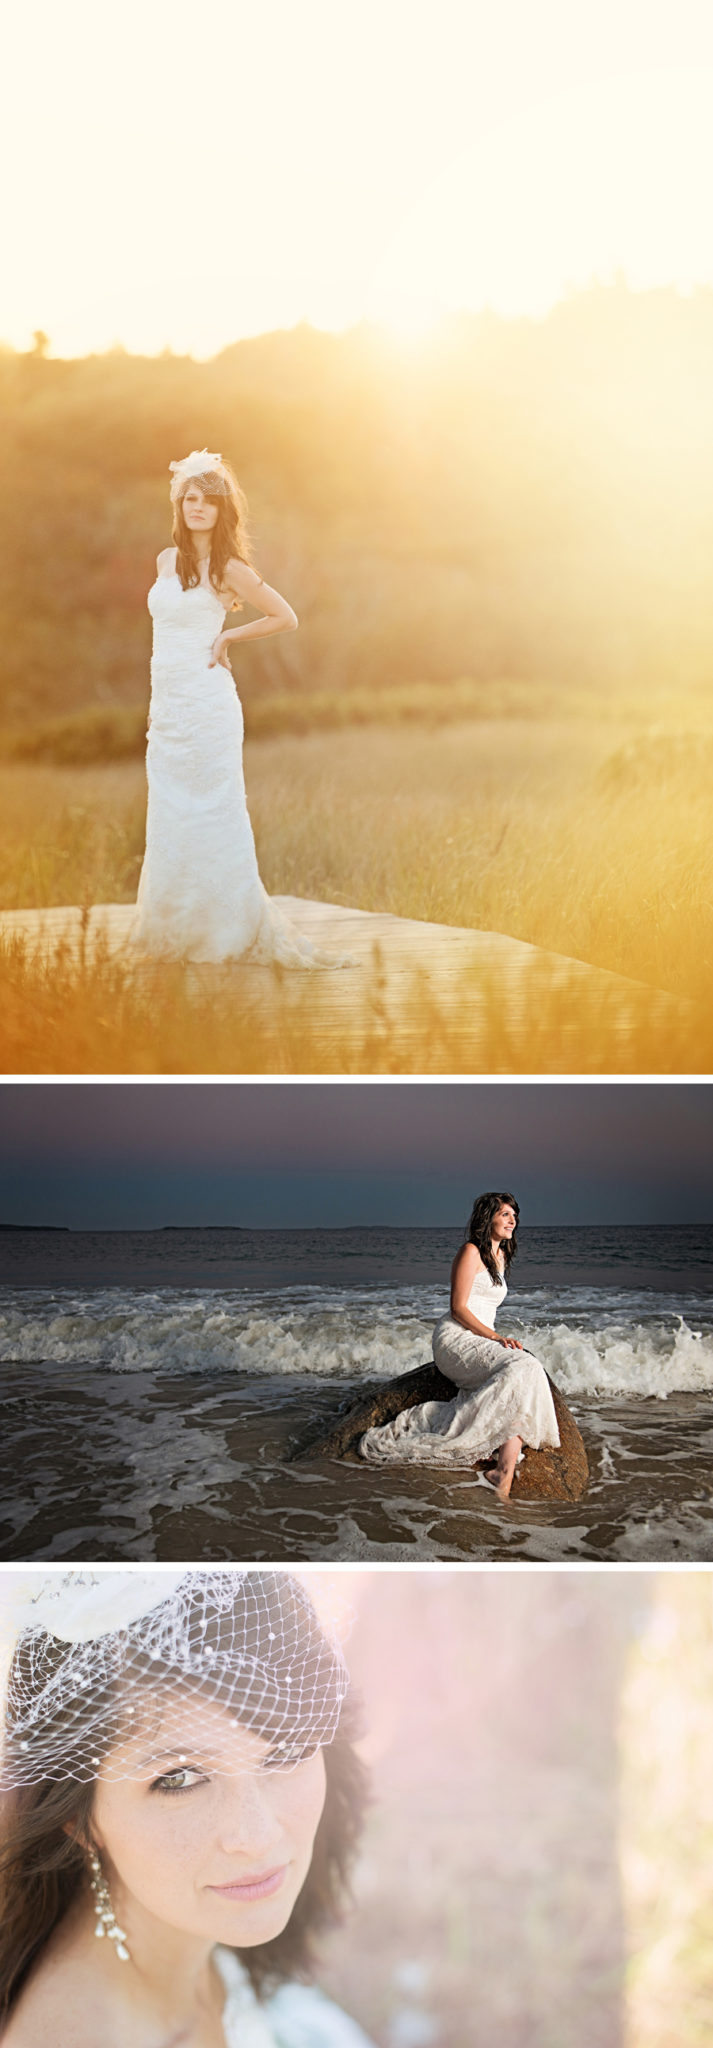 Shoot & Share - Halifax Wedding Photographer | This is Photography ...